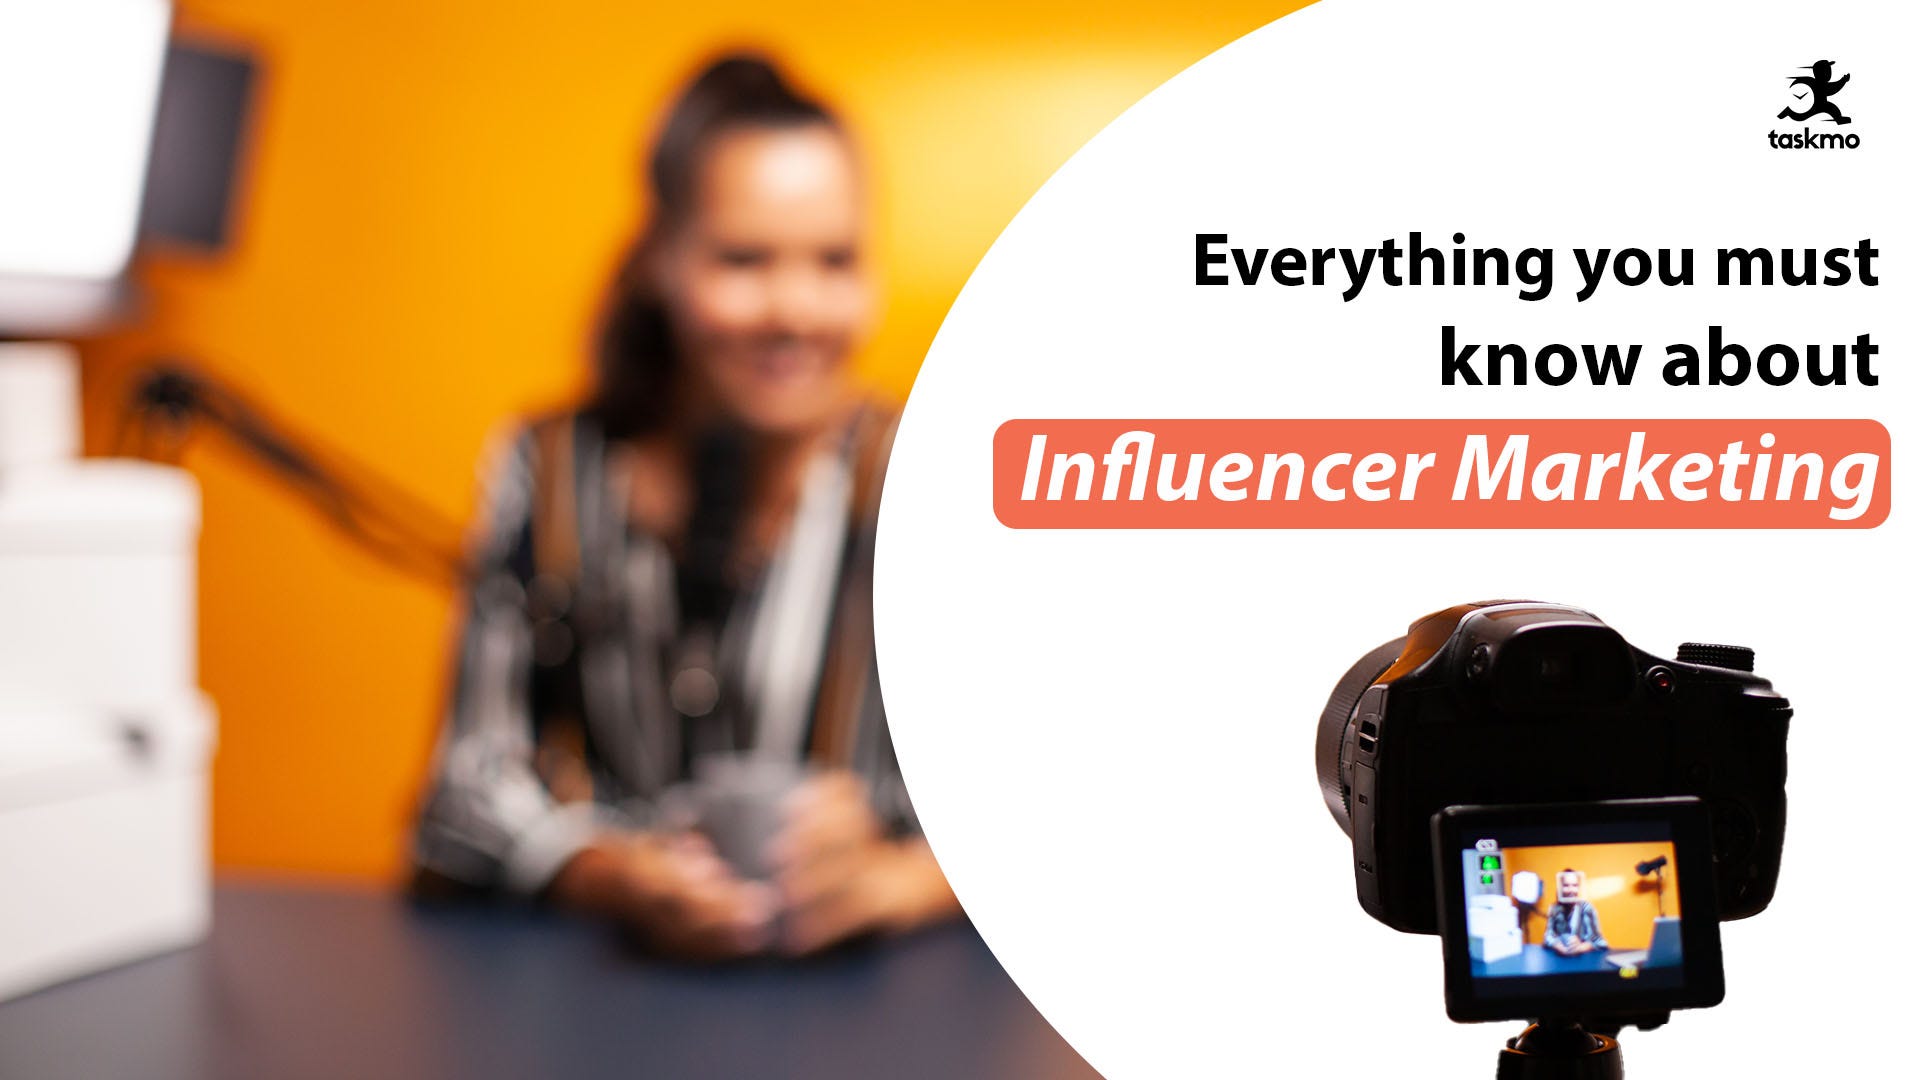 Everything you must know about Influencer Marketing